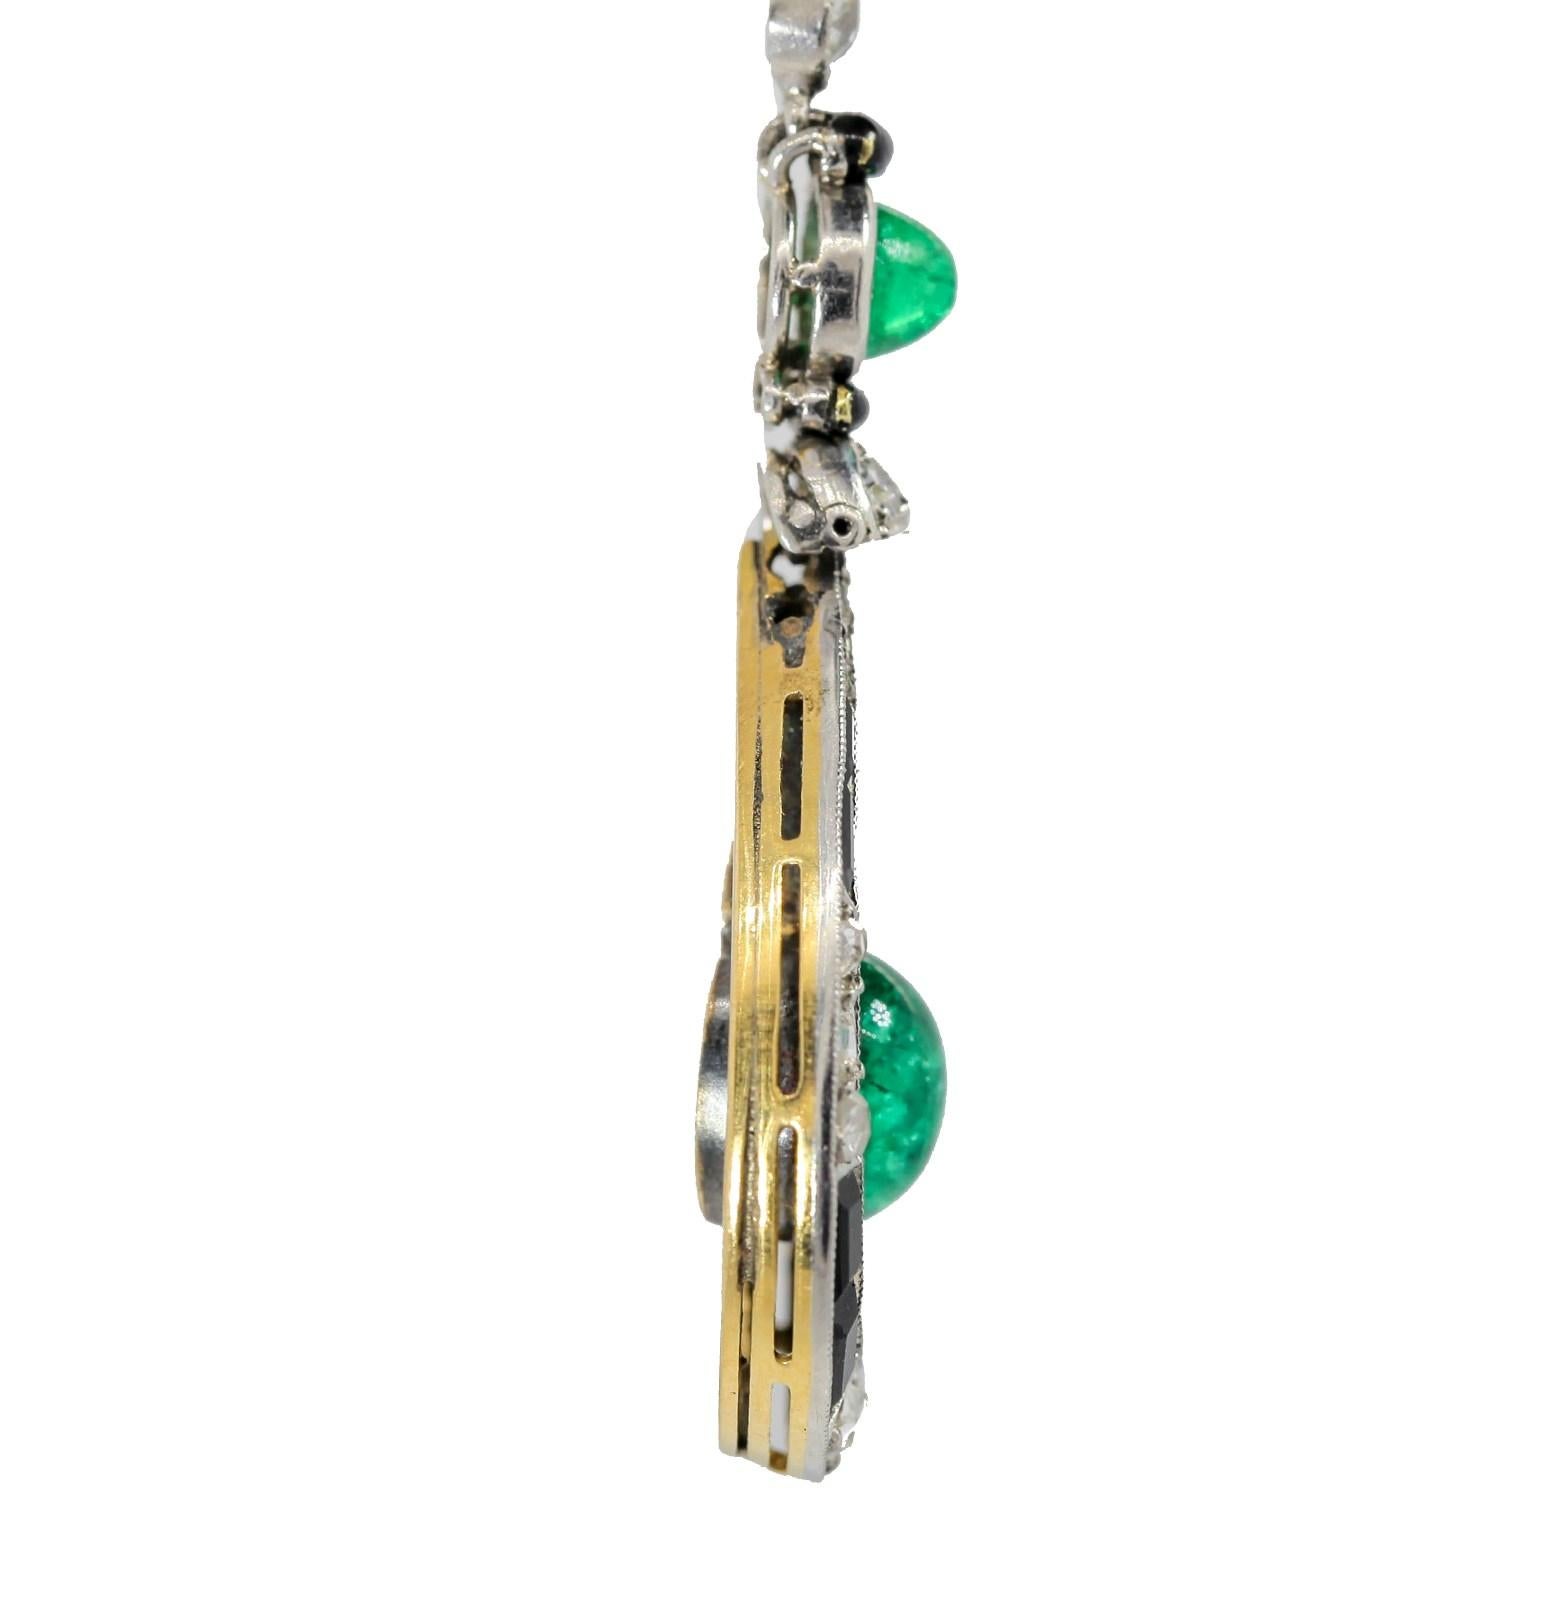 Circa 1920s  unique dangling earrings.  Rose cut Diamond flower tops suspend pear shape frames set with old cut diamonds, calibre Onyx  and Colombian Emeralds.  The centers dangle diamond bars ending in larger cabochon Colombian Emeralds  All old